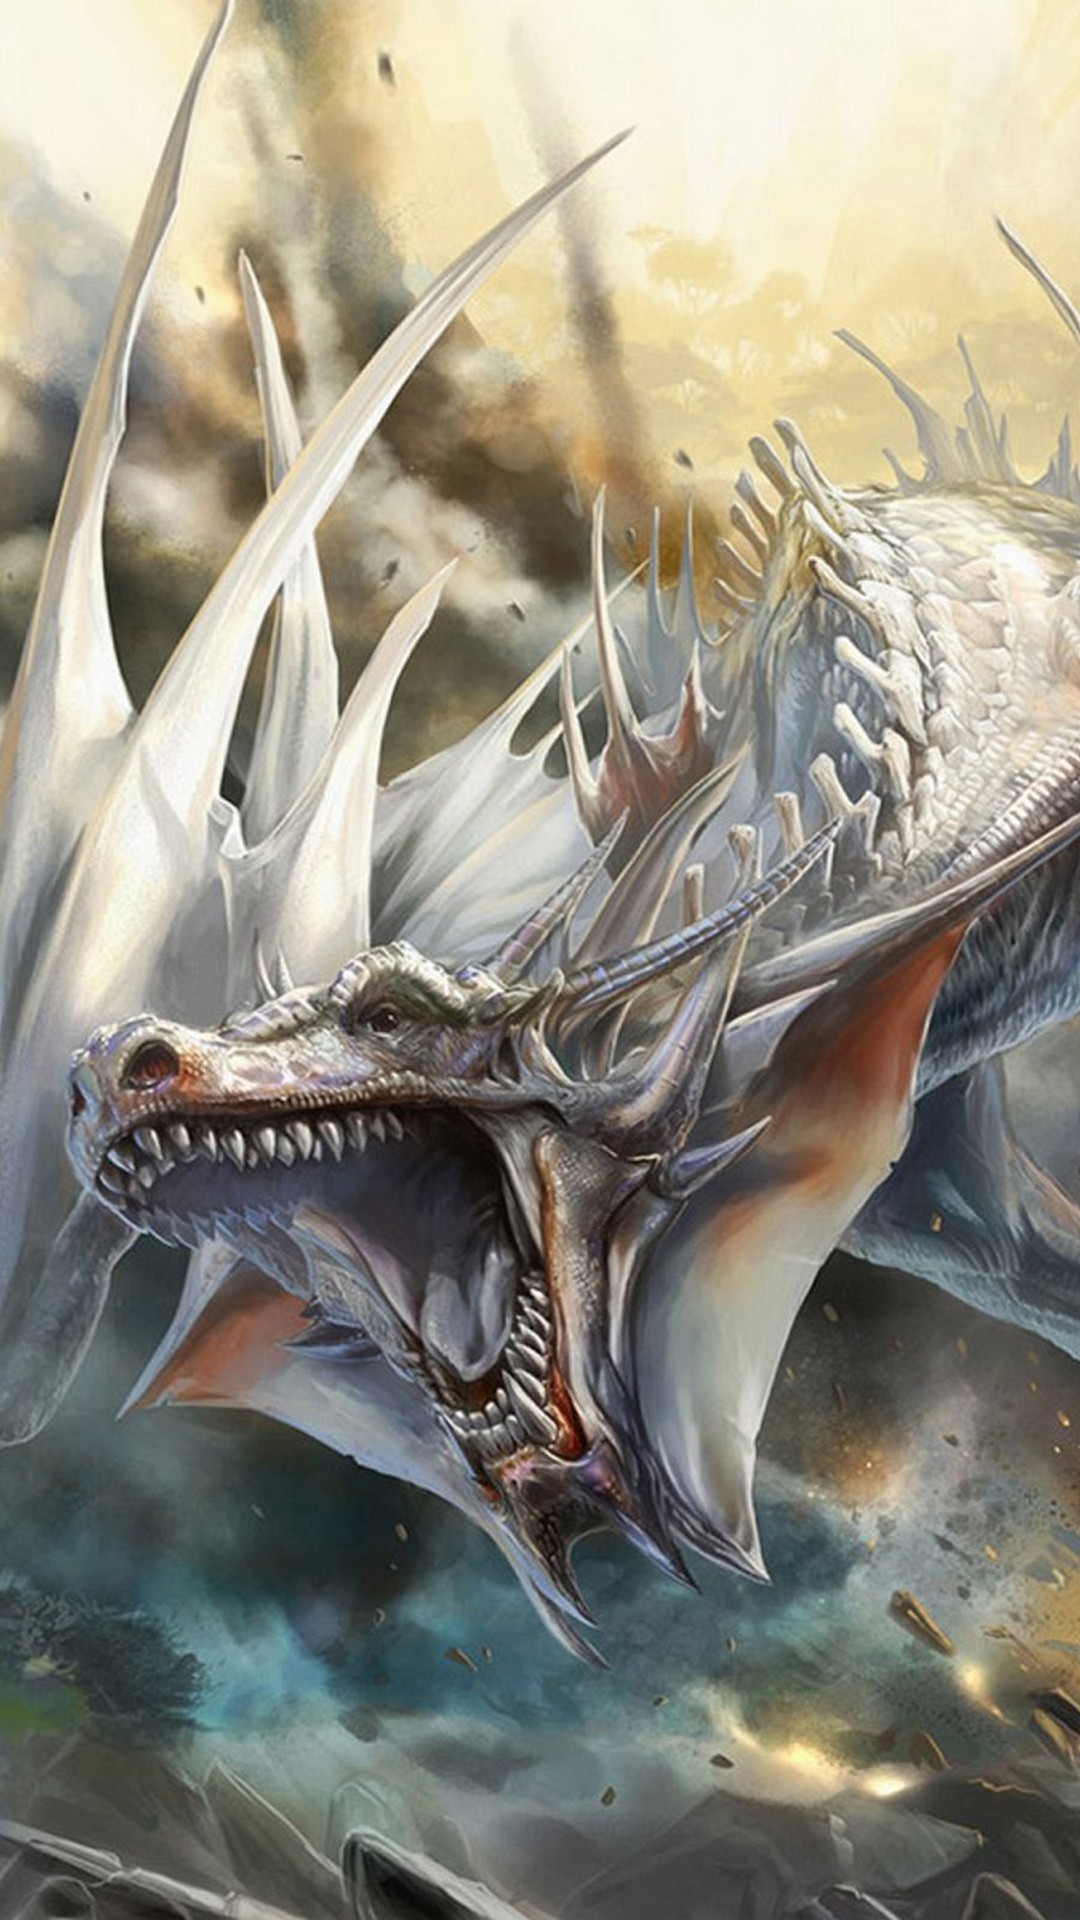 Young White Dragon by BenWootten on DeviantArt